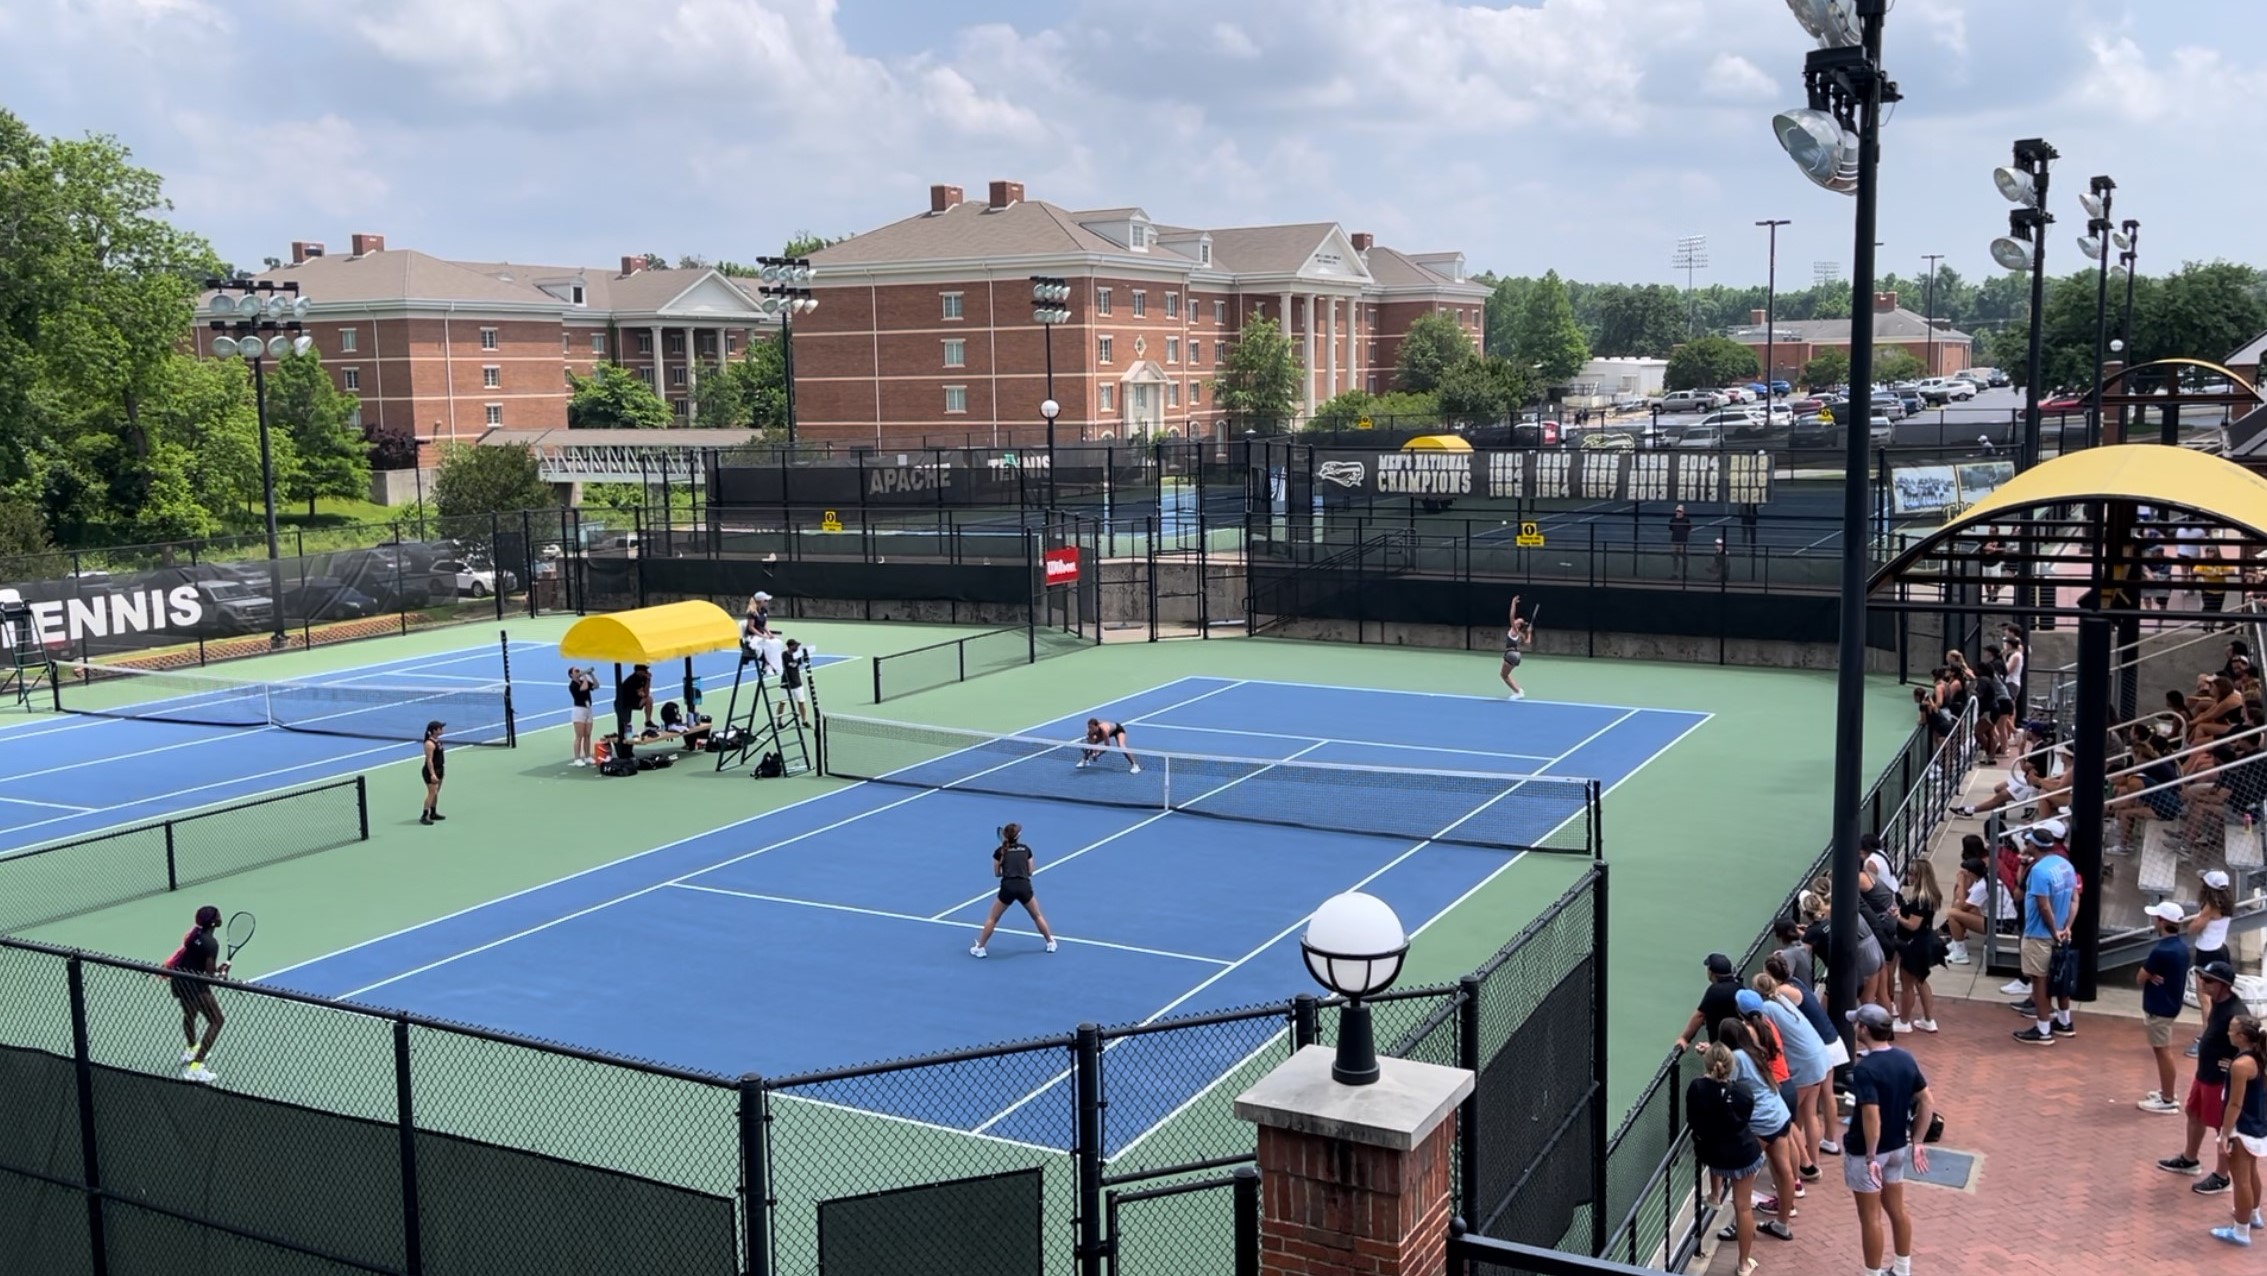 Women's Nationals: Two singles and one doubles team make it to Championship Round